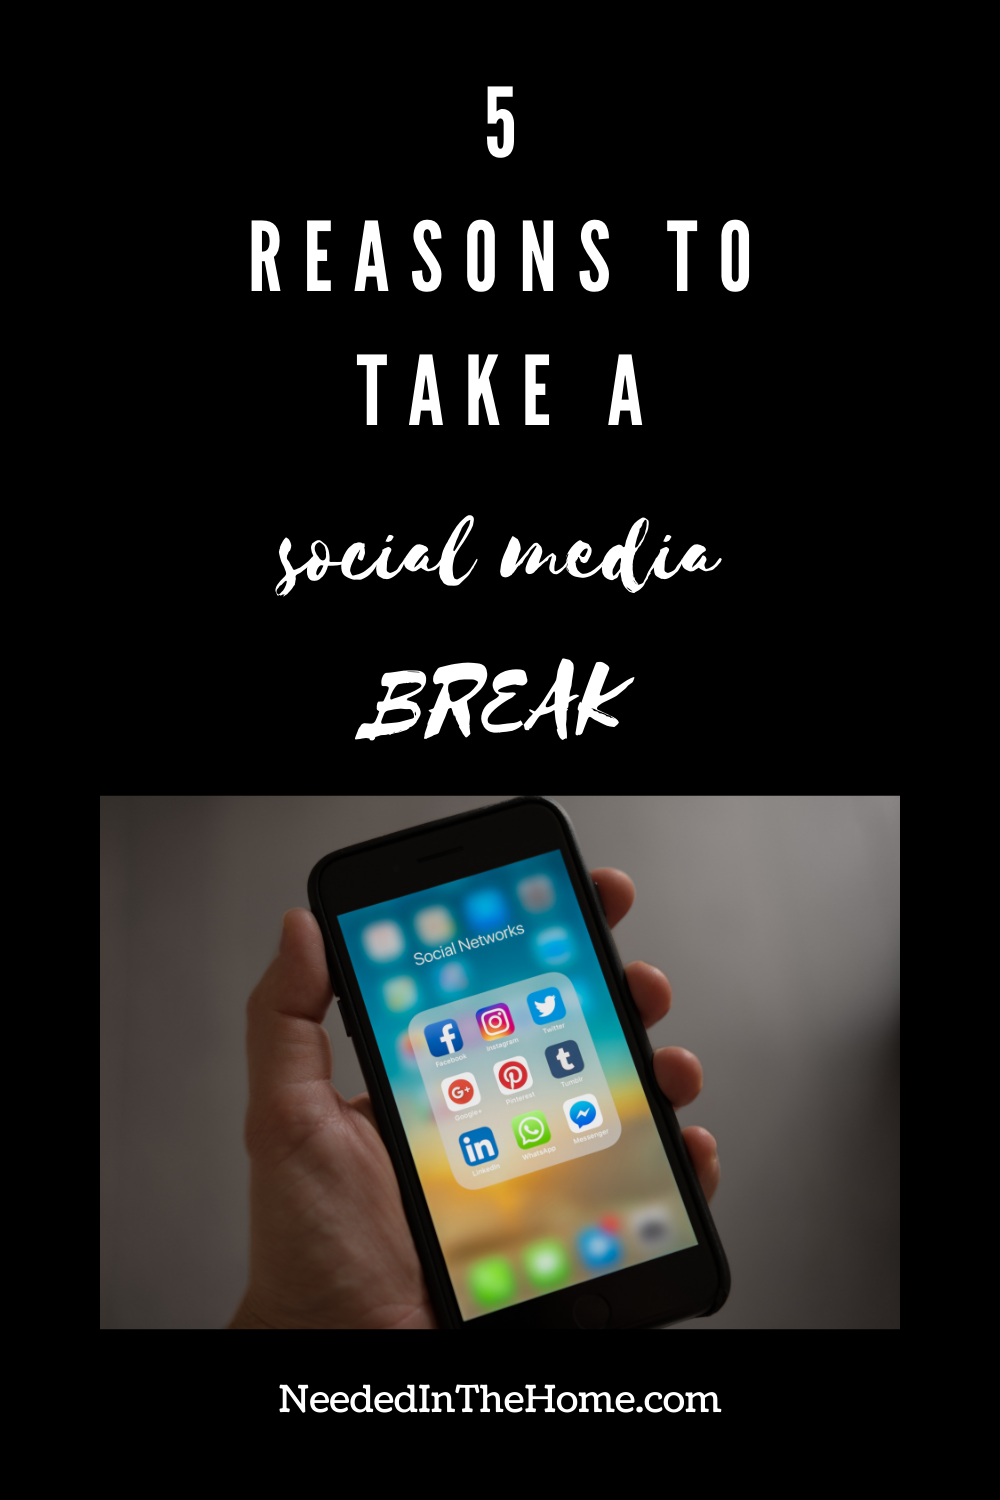 pinterest-pin-description 5 reasons to take a social media break smartphone icons apps in hand neededinthehome